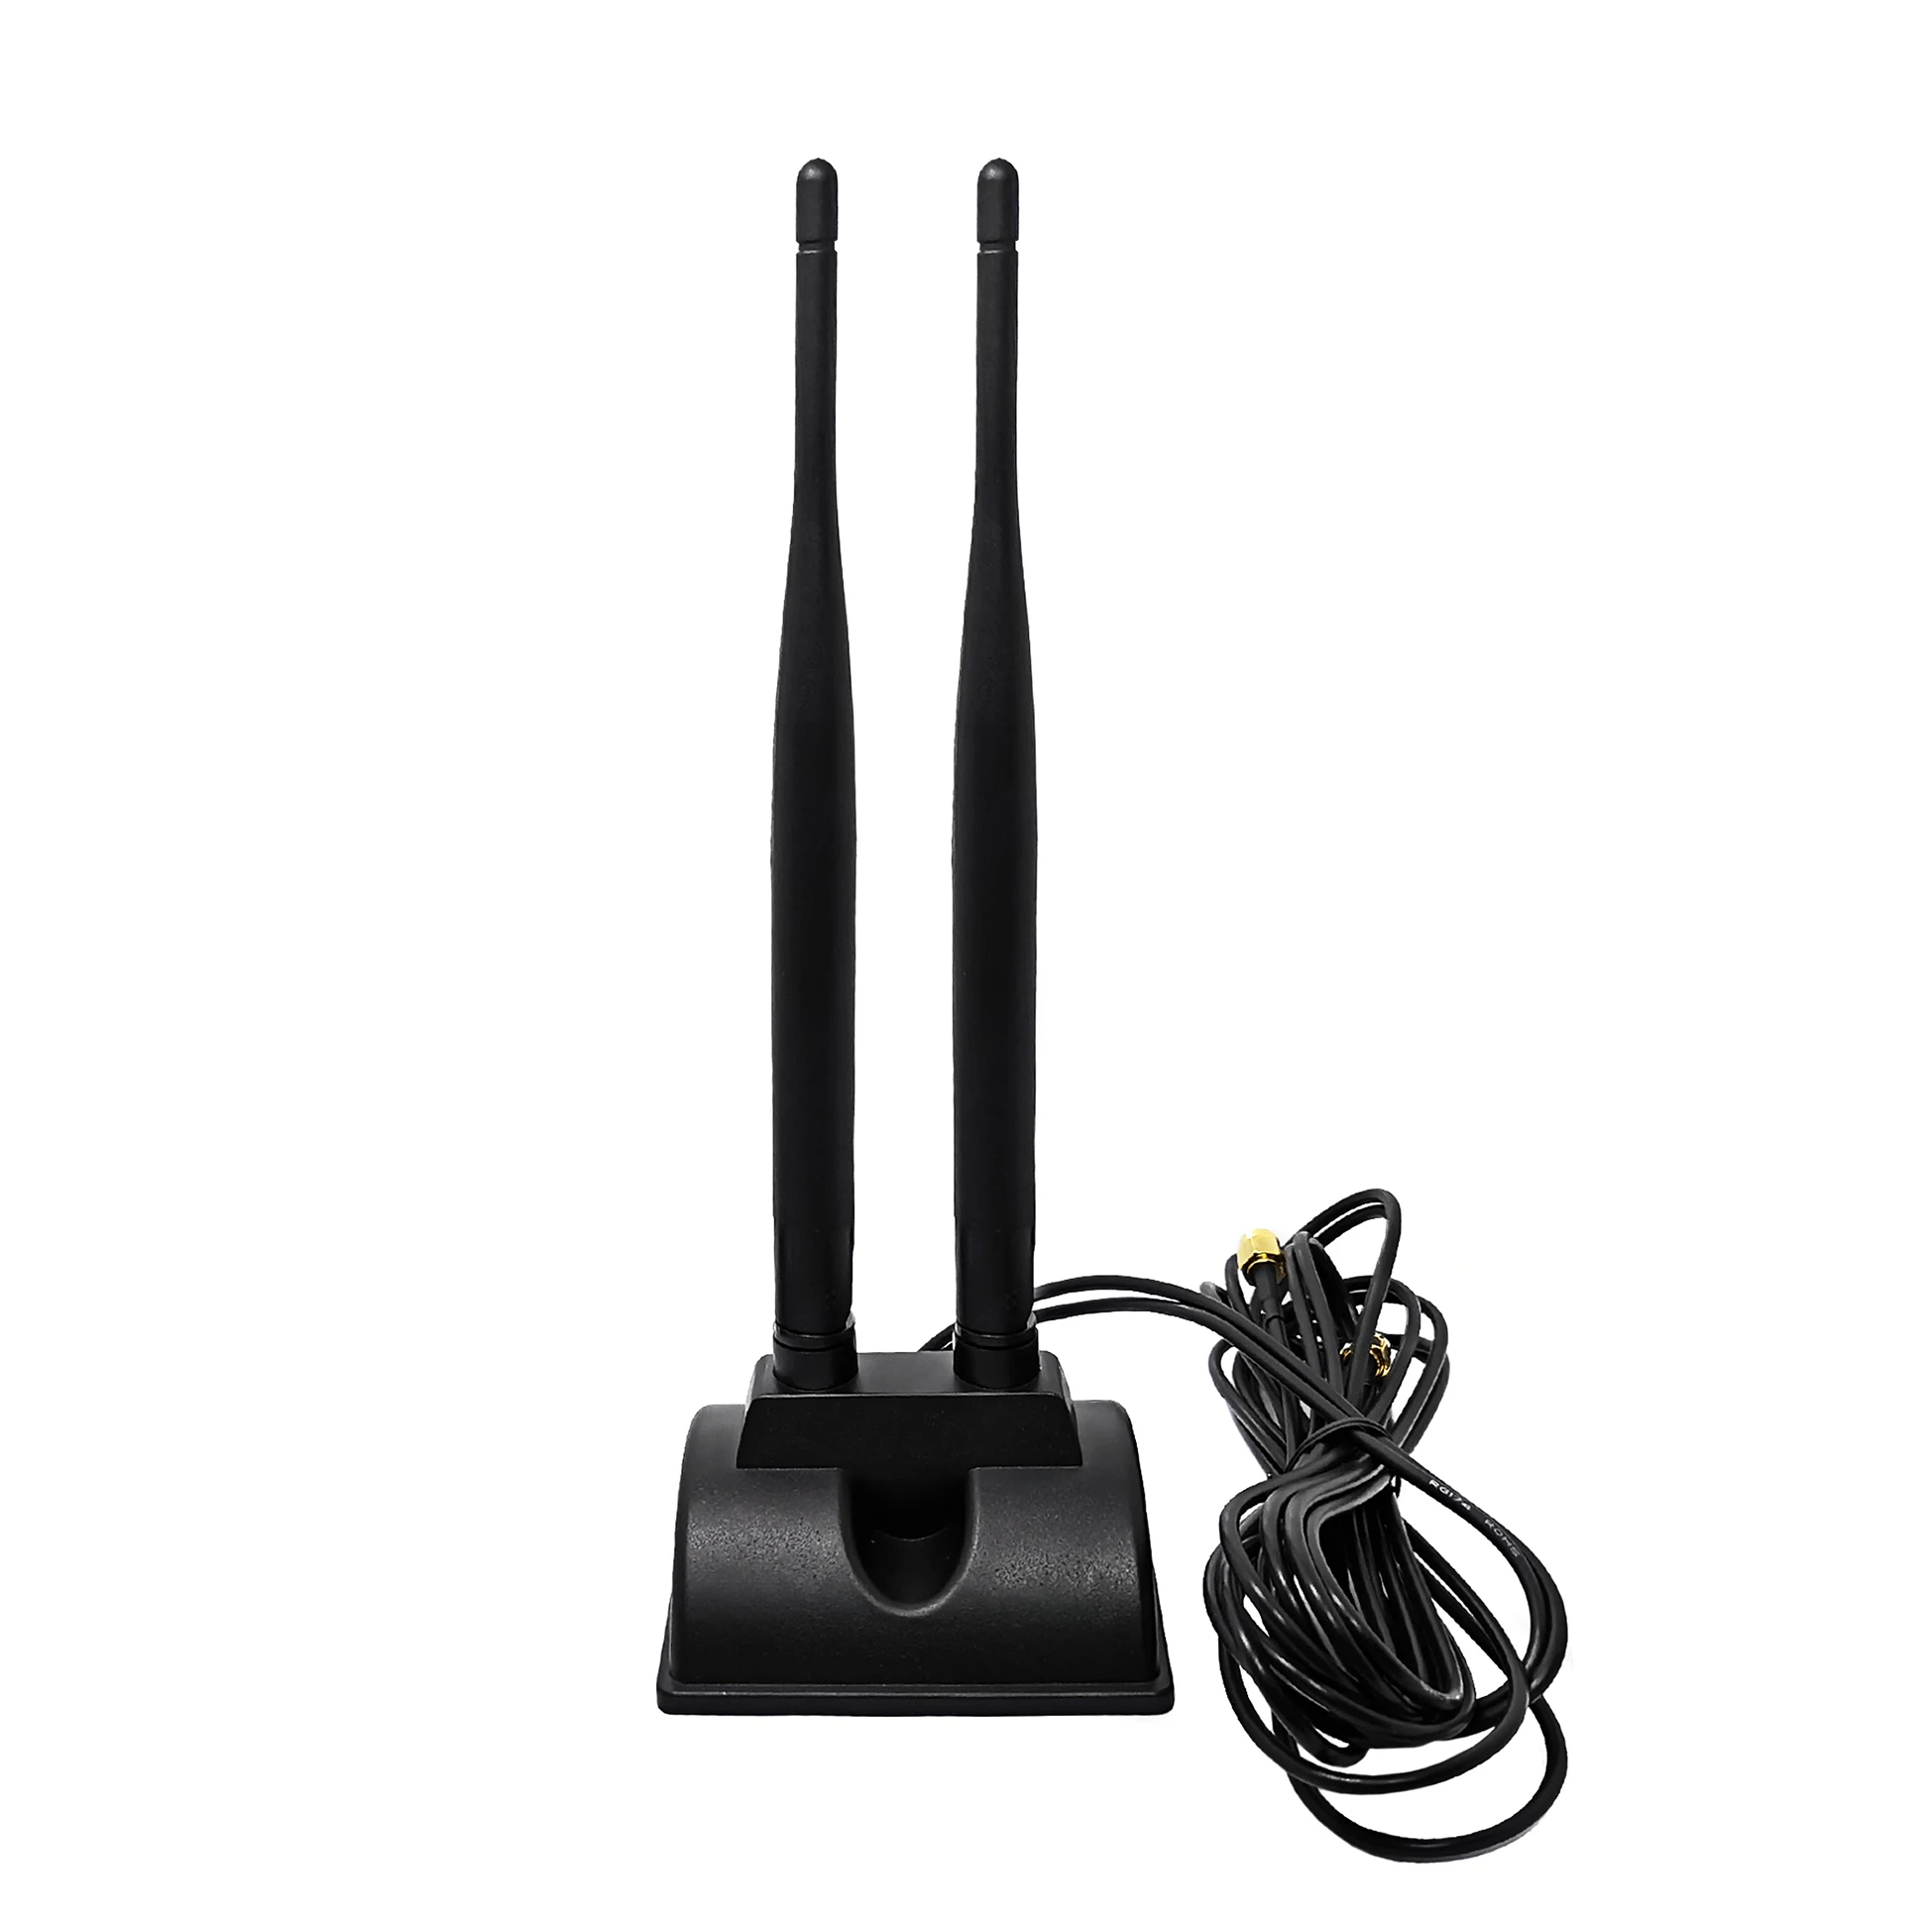 5G Gsm Gps repeater sma male  antenna Manufactory antennas wifi Router double frequency 2.4G Antenna manufacture